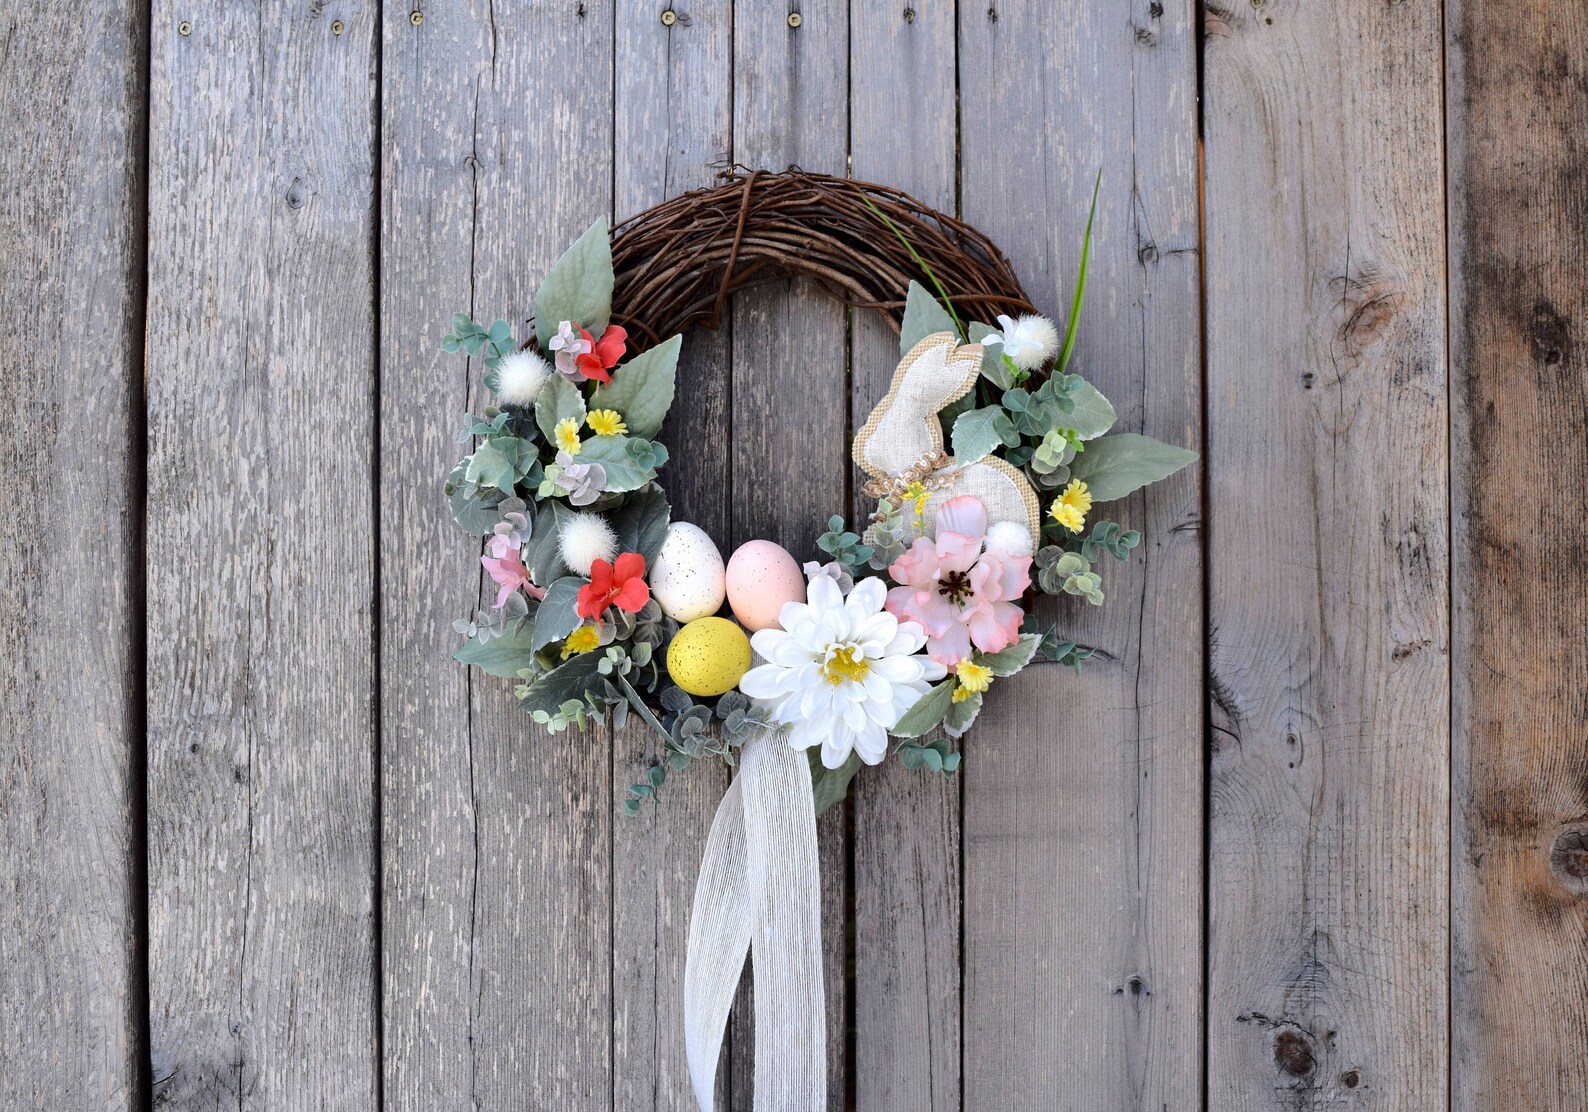 Partially Covered Easter Bunny Floral Greenery Grapevine Wreaths with Eggs